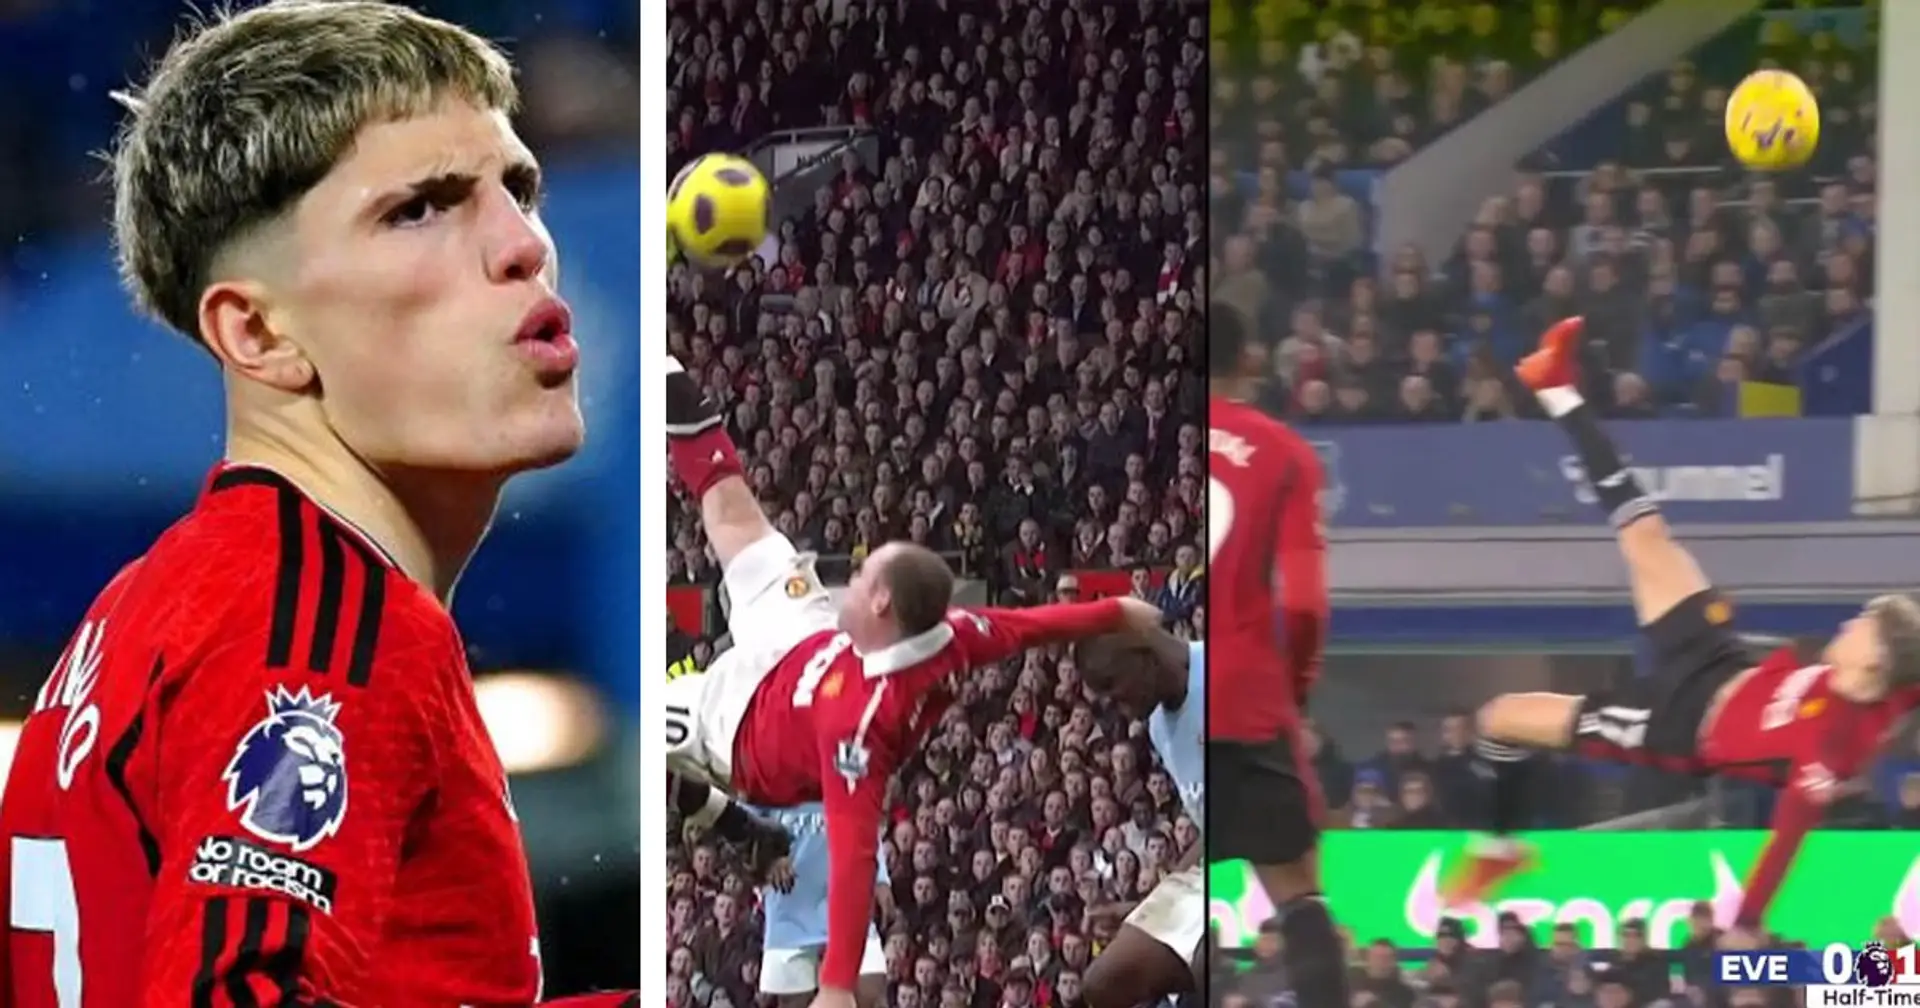 Garnacho's wonder goal vs Everton or Rooney's iconic Manchester Derby goal? Which do you think is better?